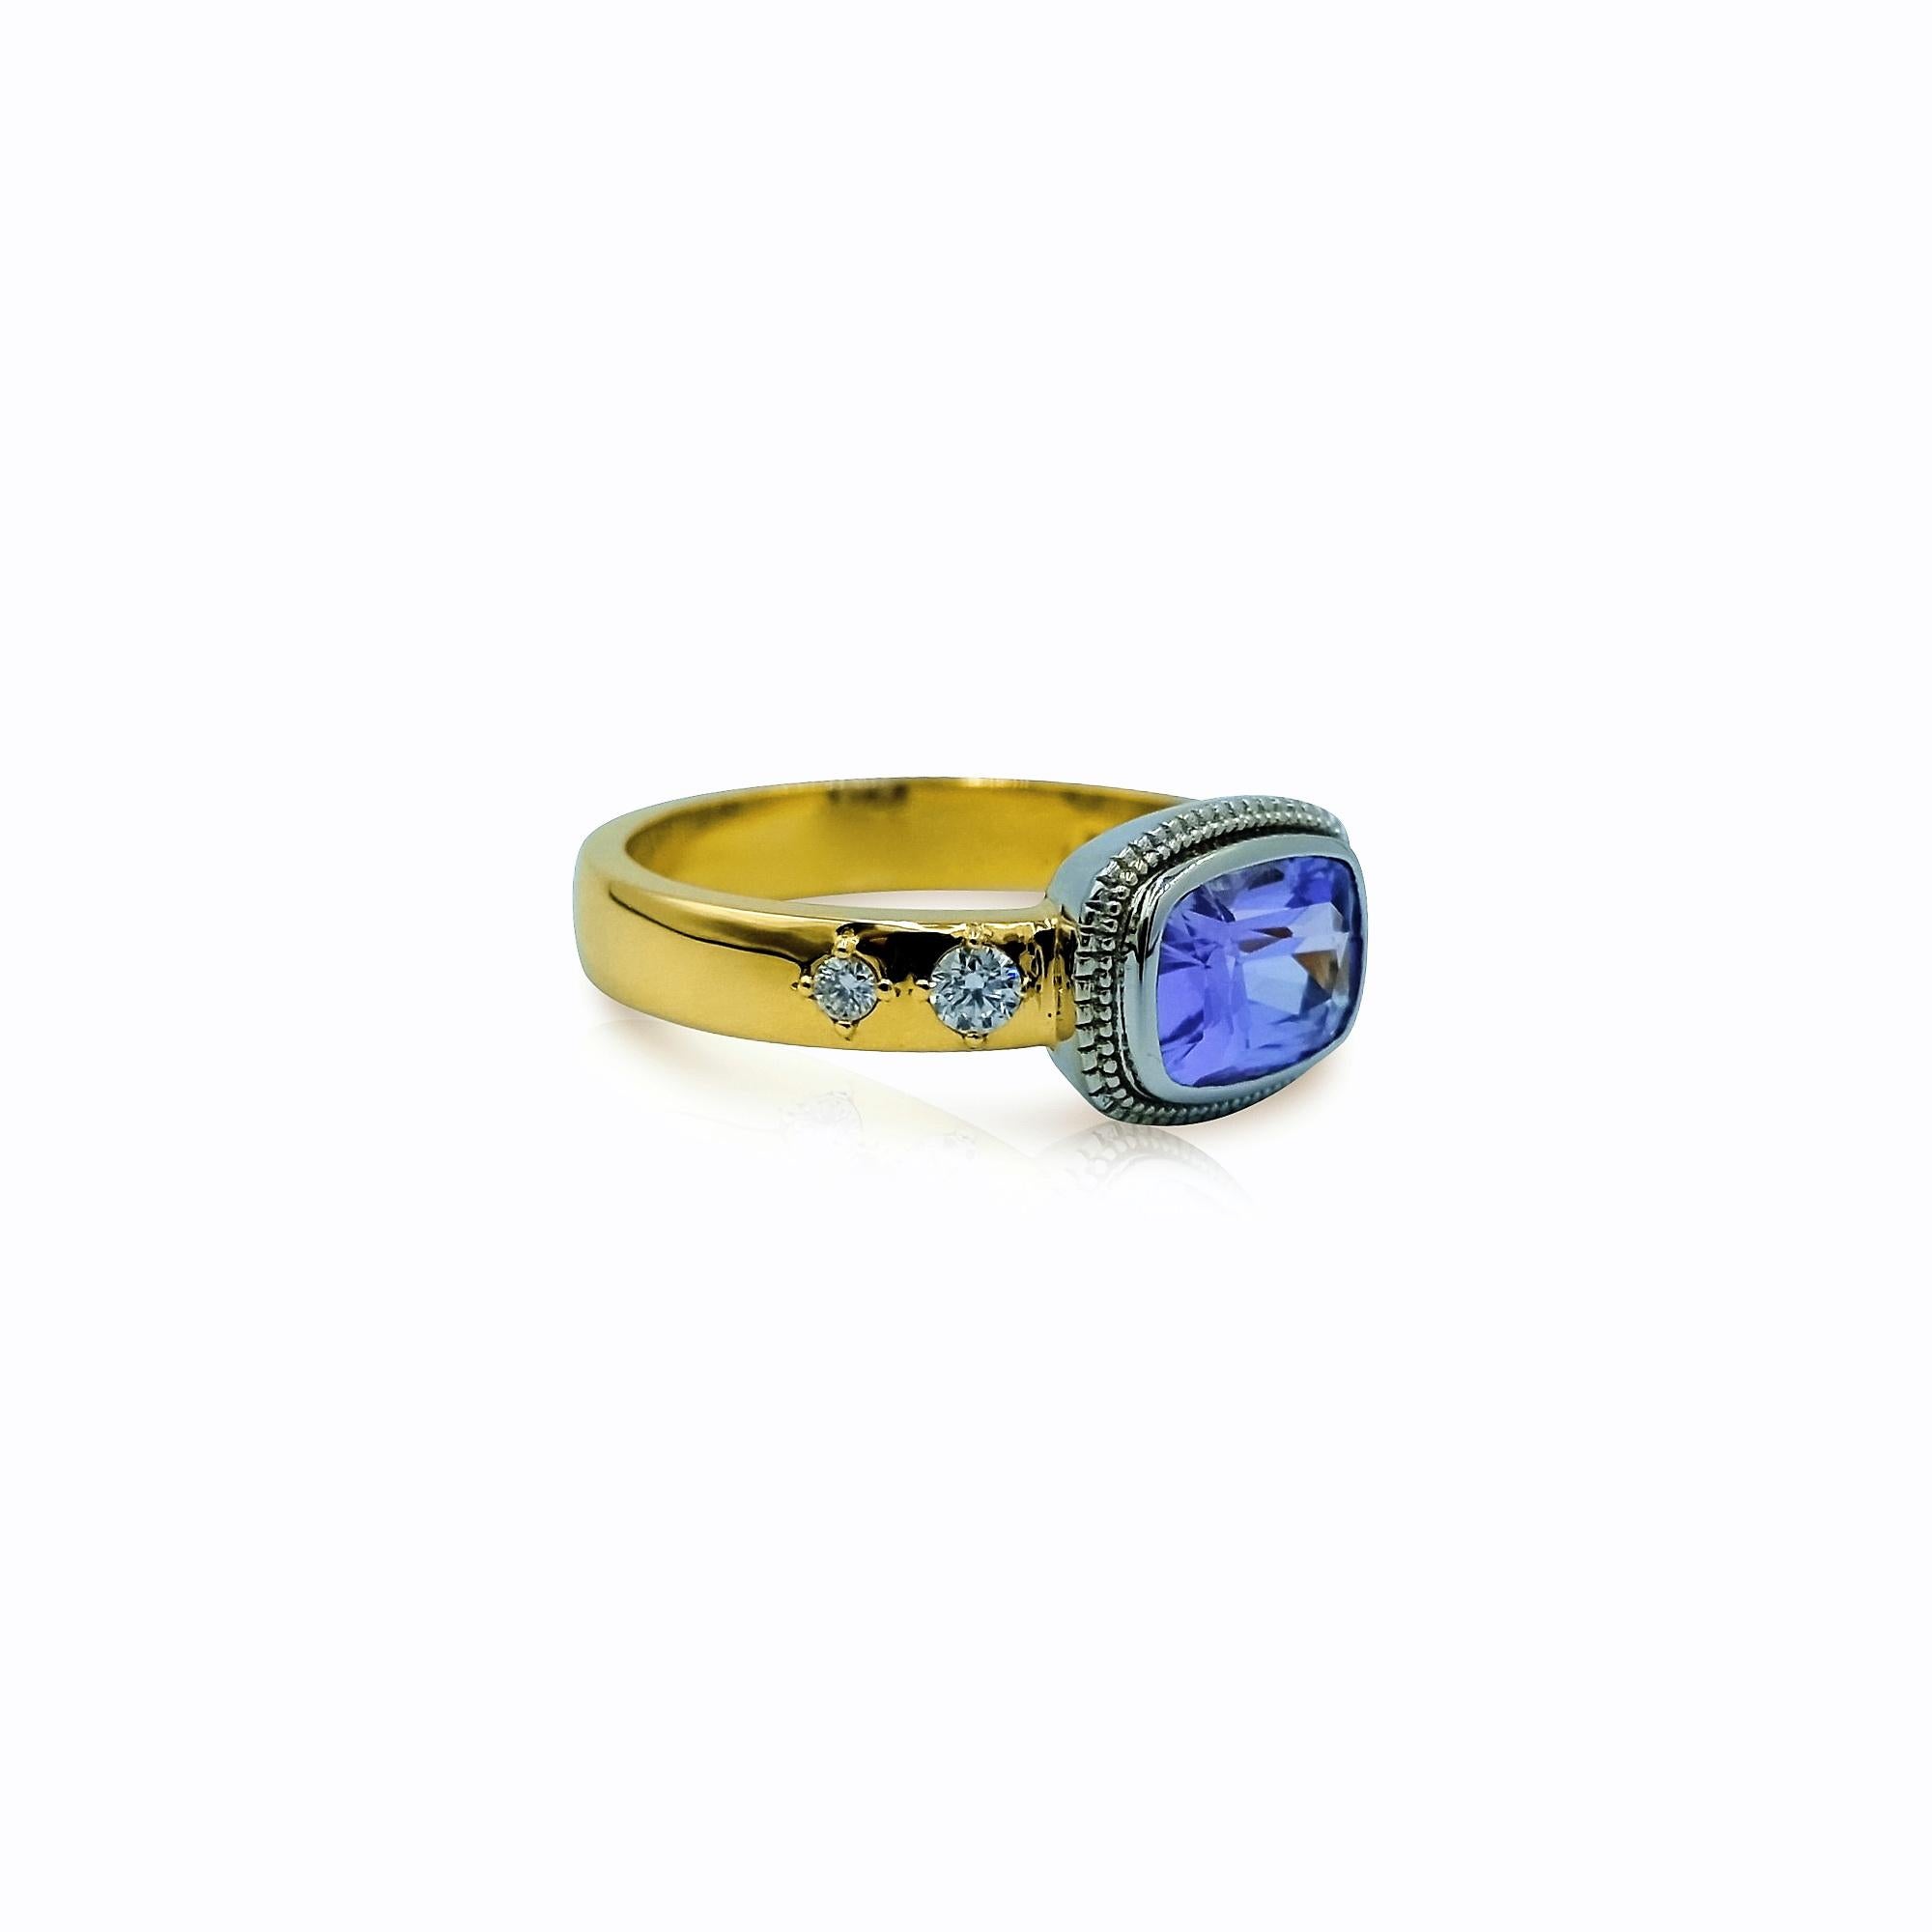 Contemporary Luca Jouel Violet Sapphire and Diamond Ring in Platinum and Yellow Gold